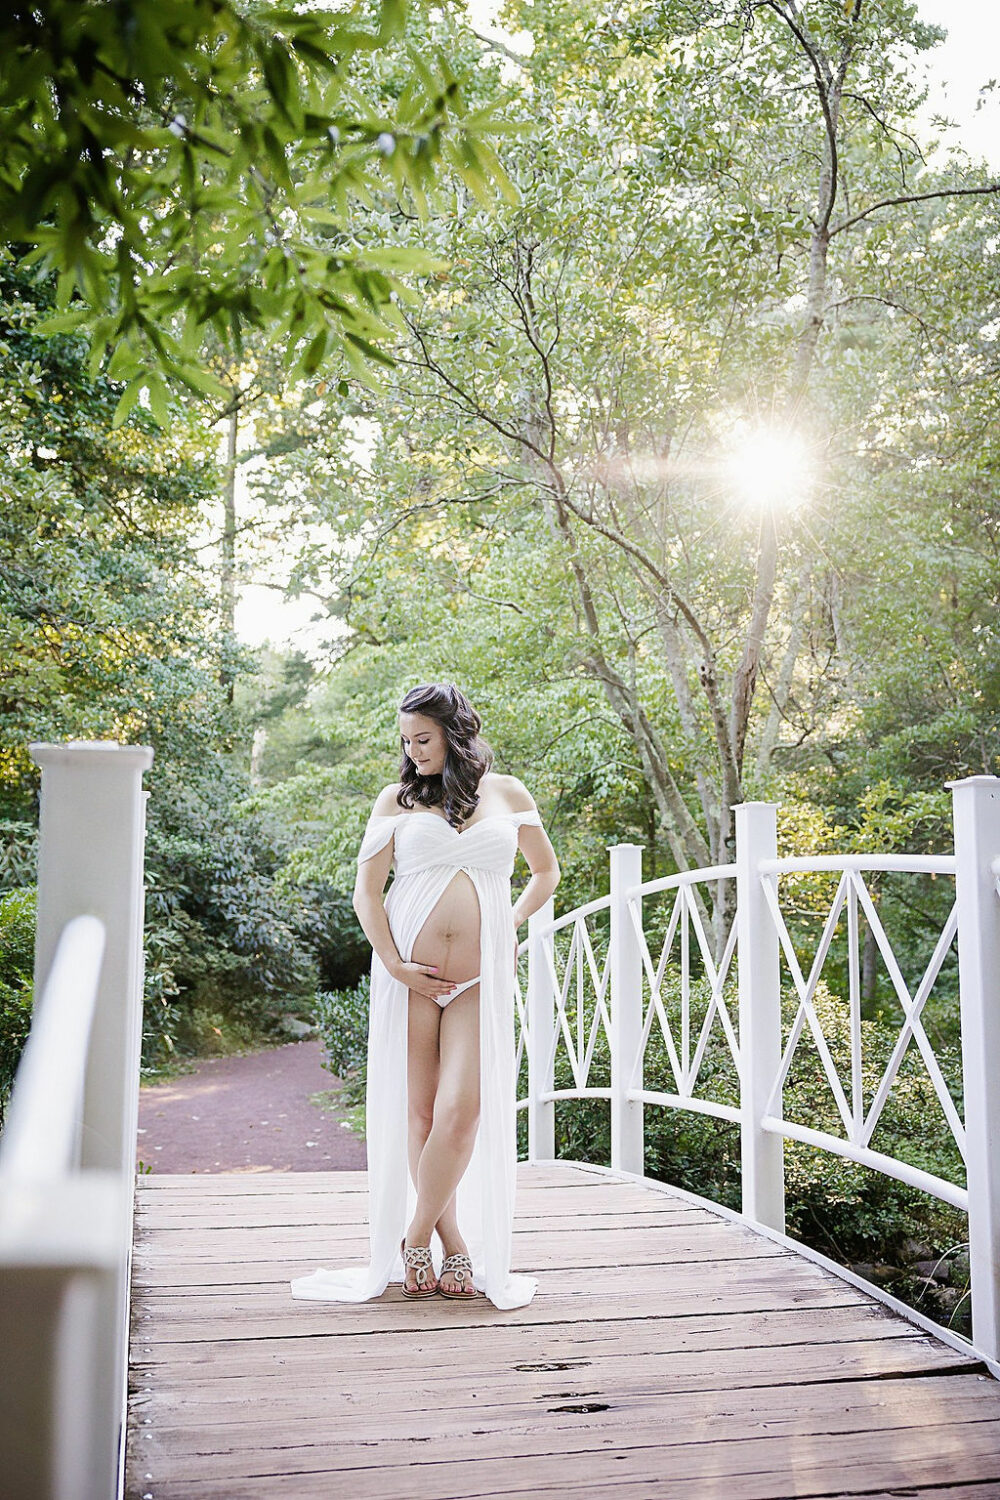 Pregnant woman on wooden bridge and garden holding her belly with her legs crossed and maternity dress for her mile stone maternity and newborn session in Mount Holly, New Jersey.